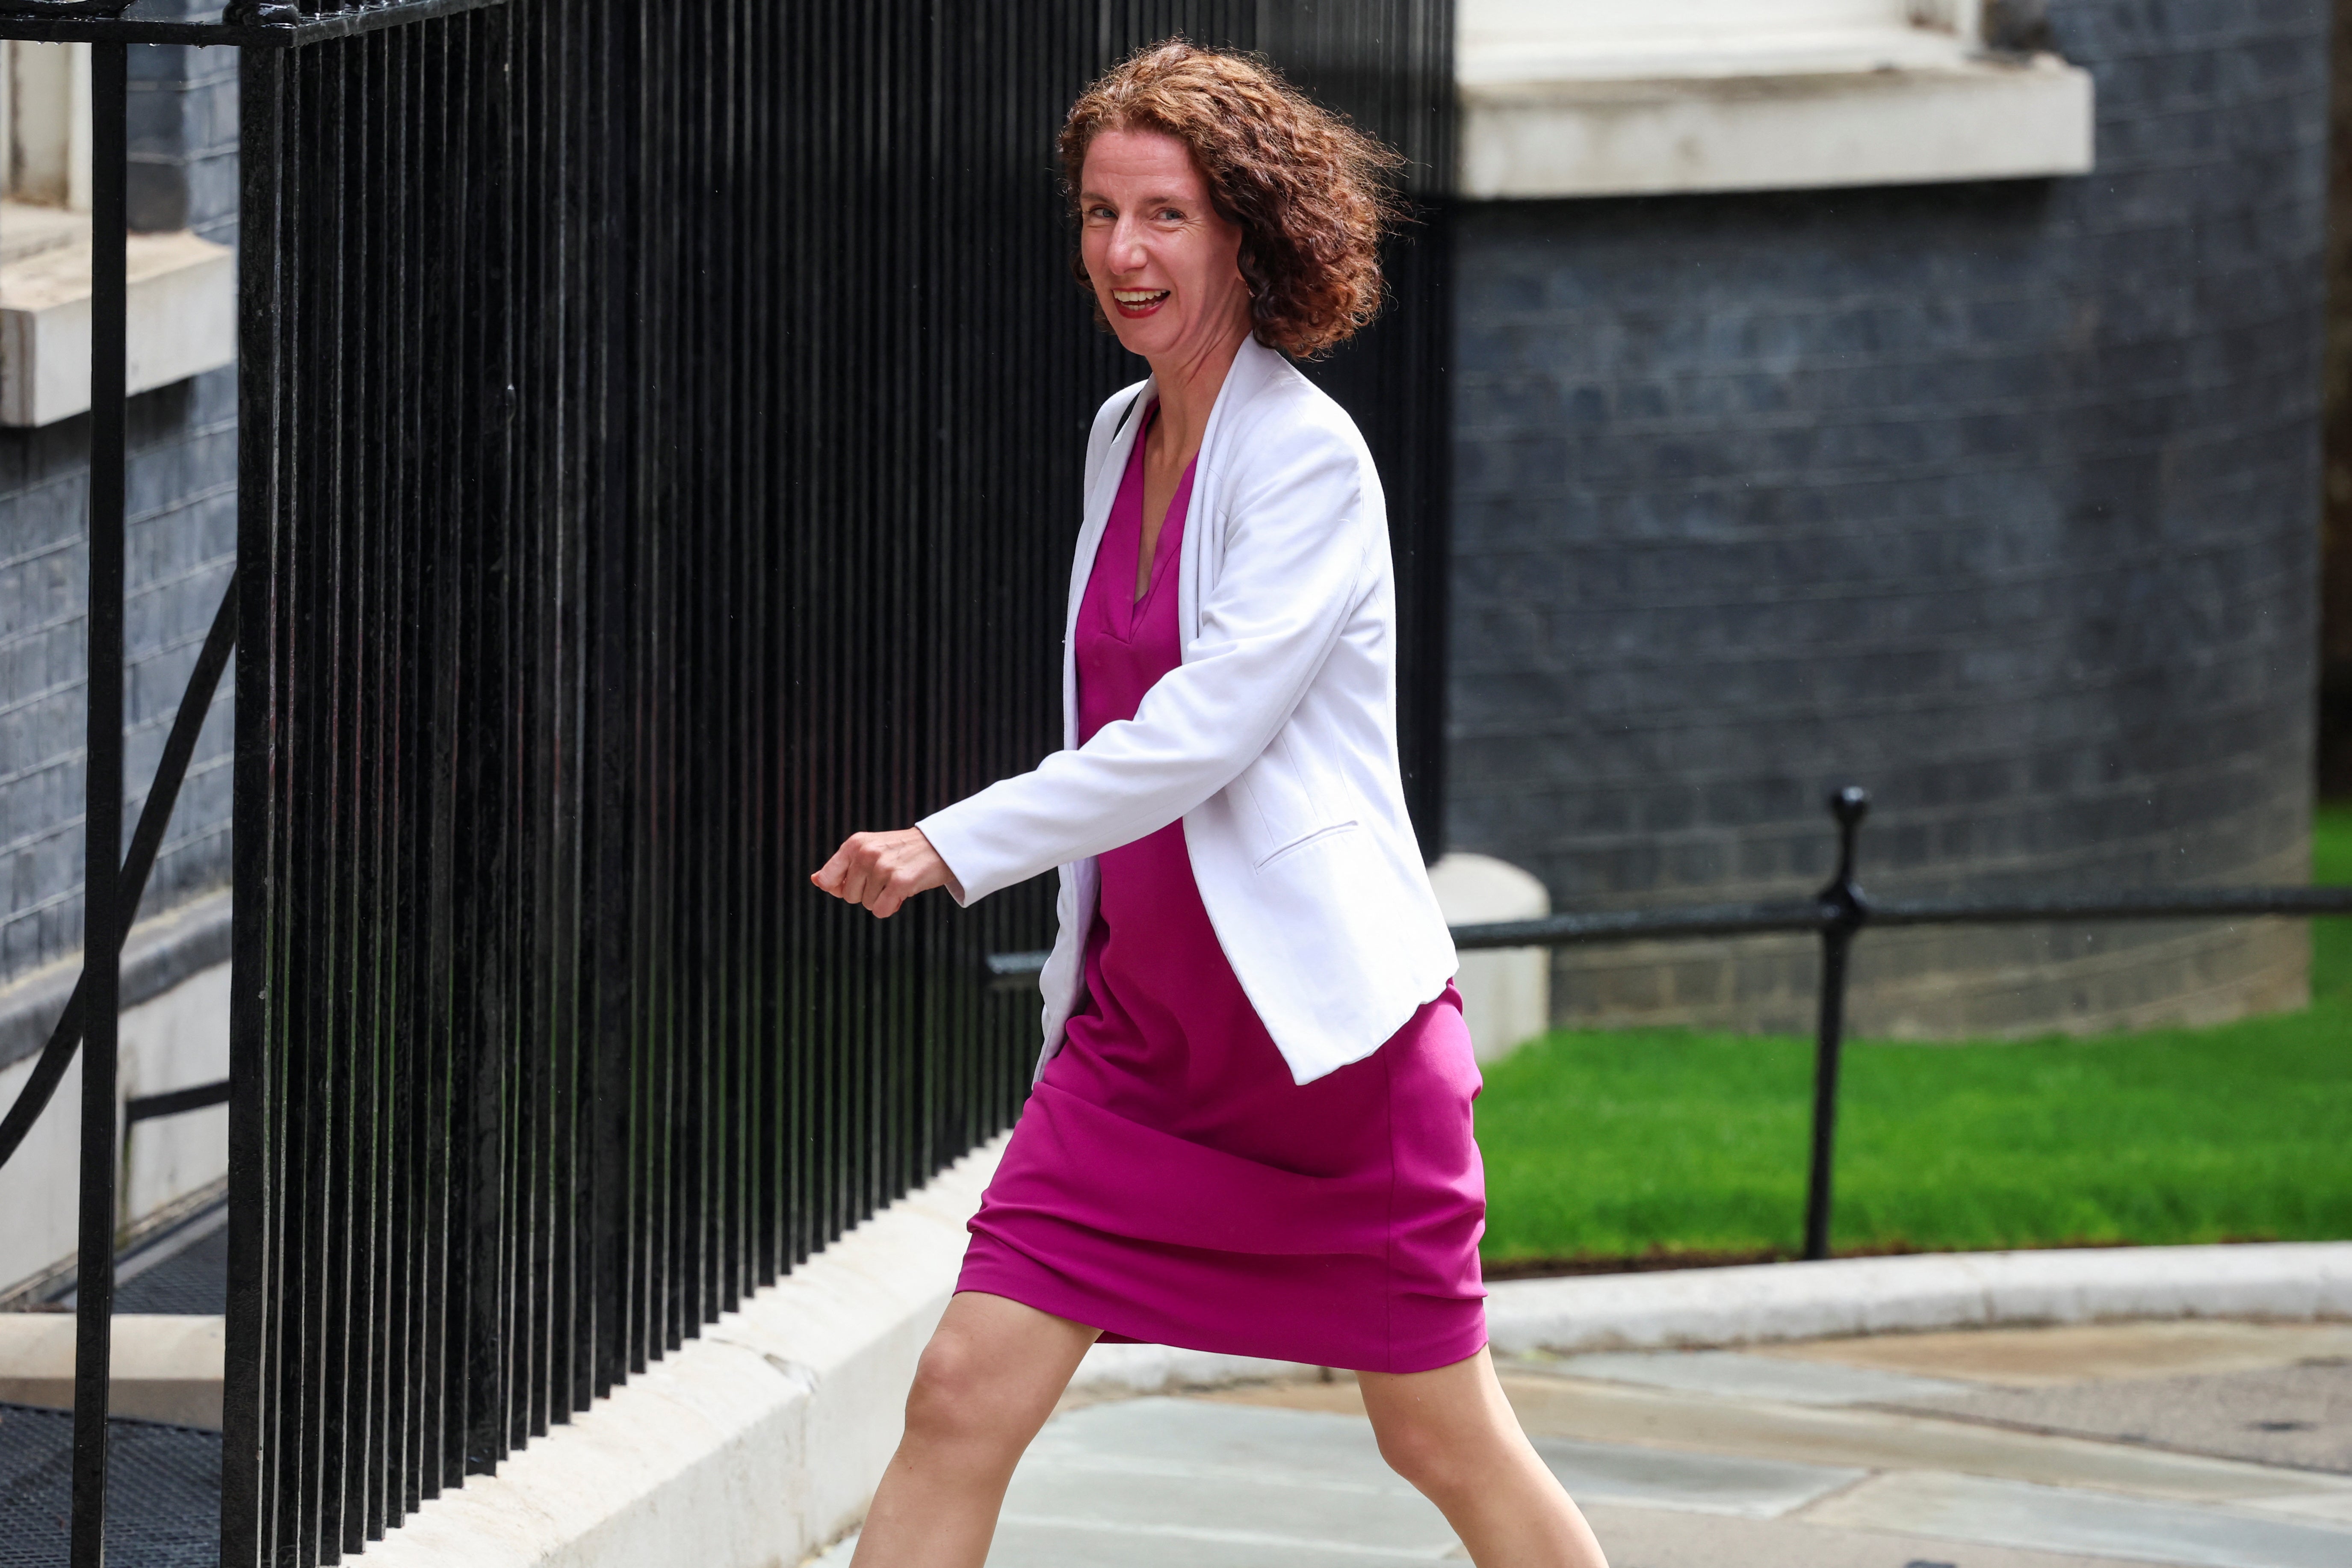 Anneliese Dodds has been appointed a minister of state – Minister for Women and Equalities – in the Department for Education